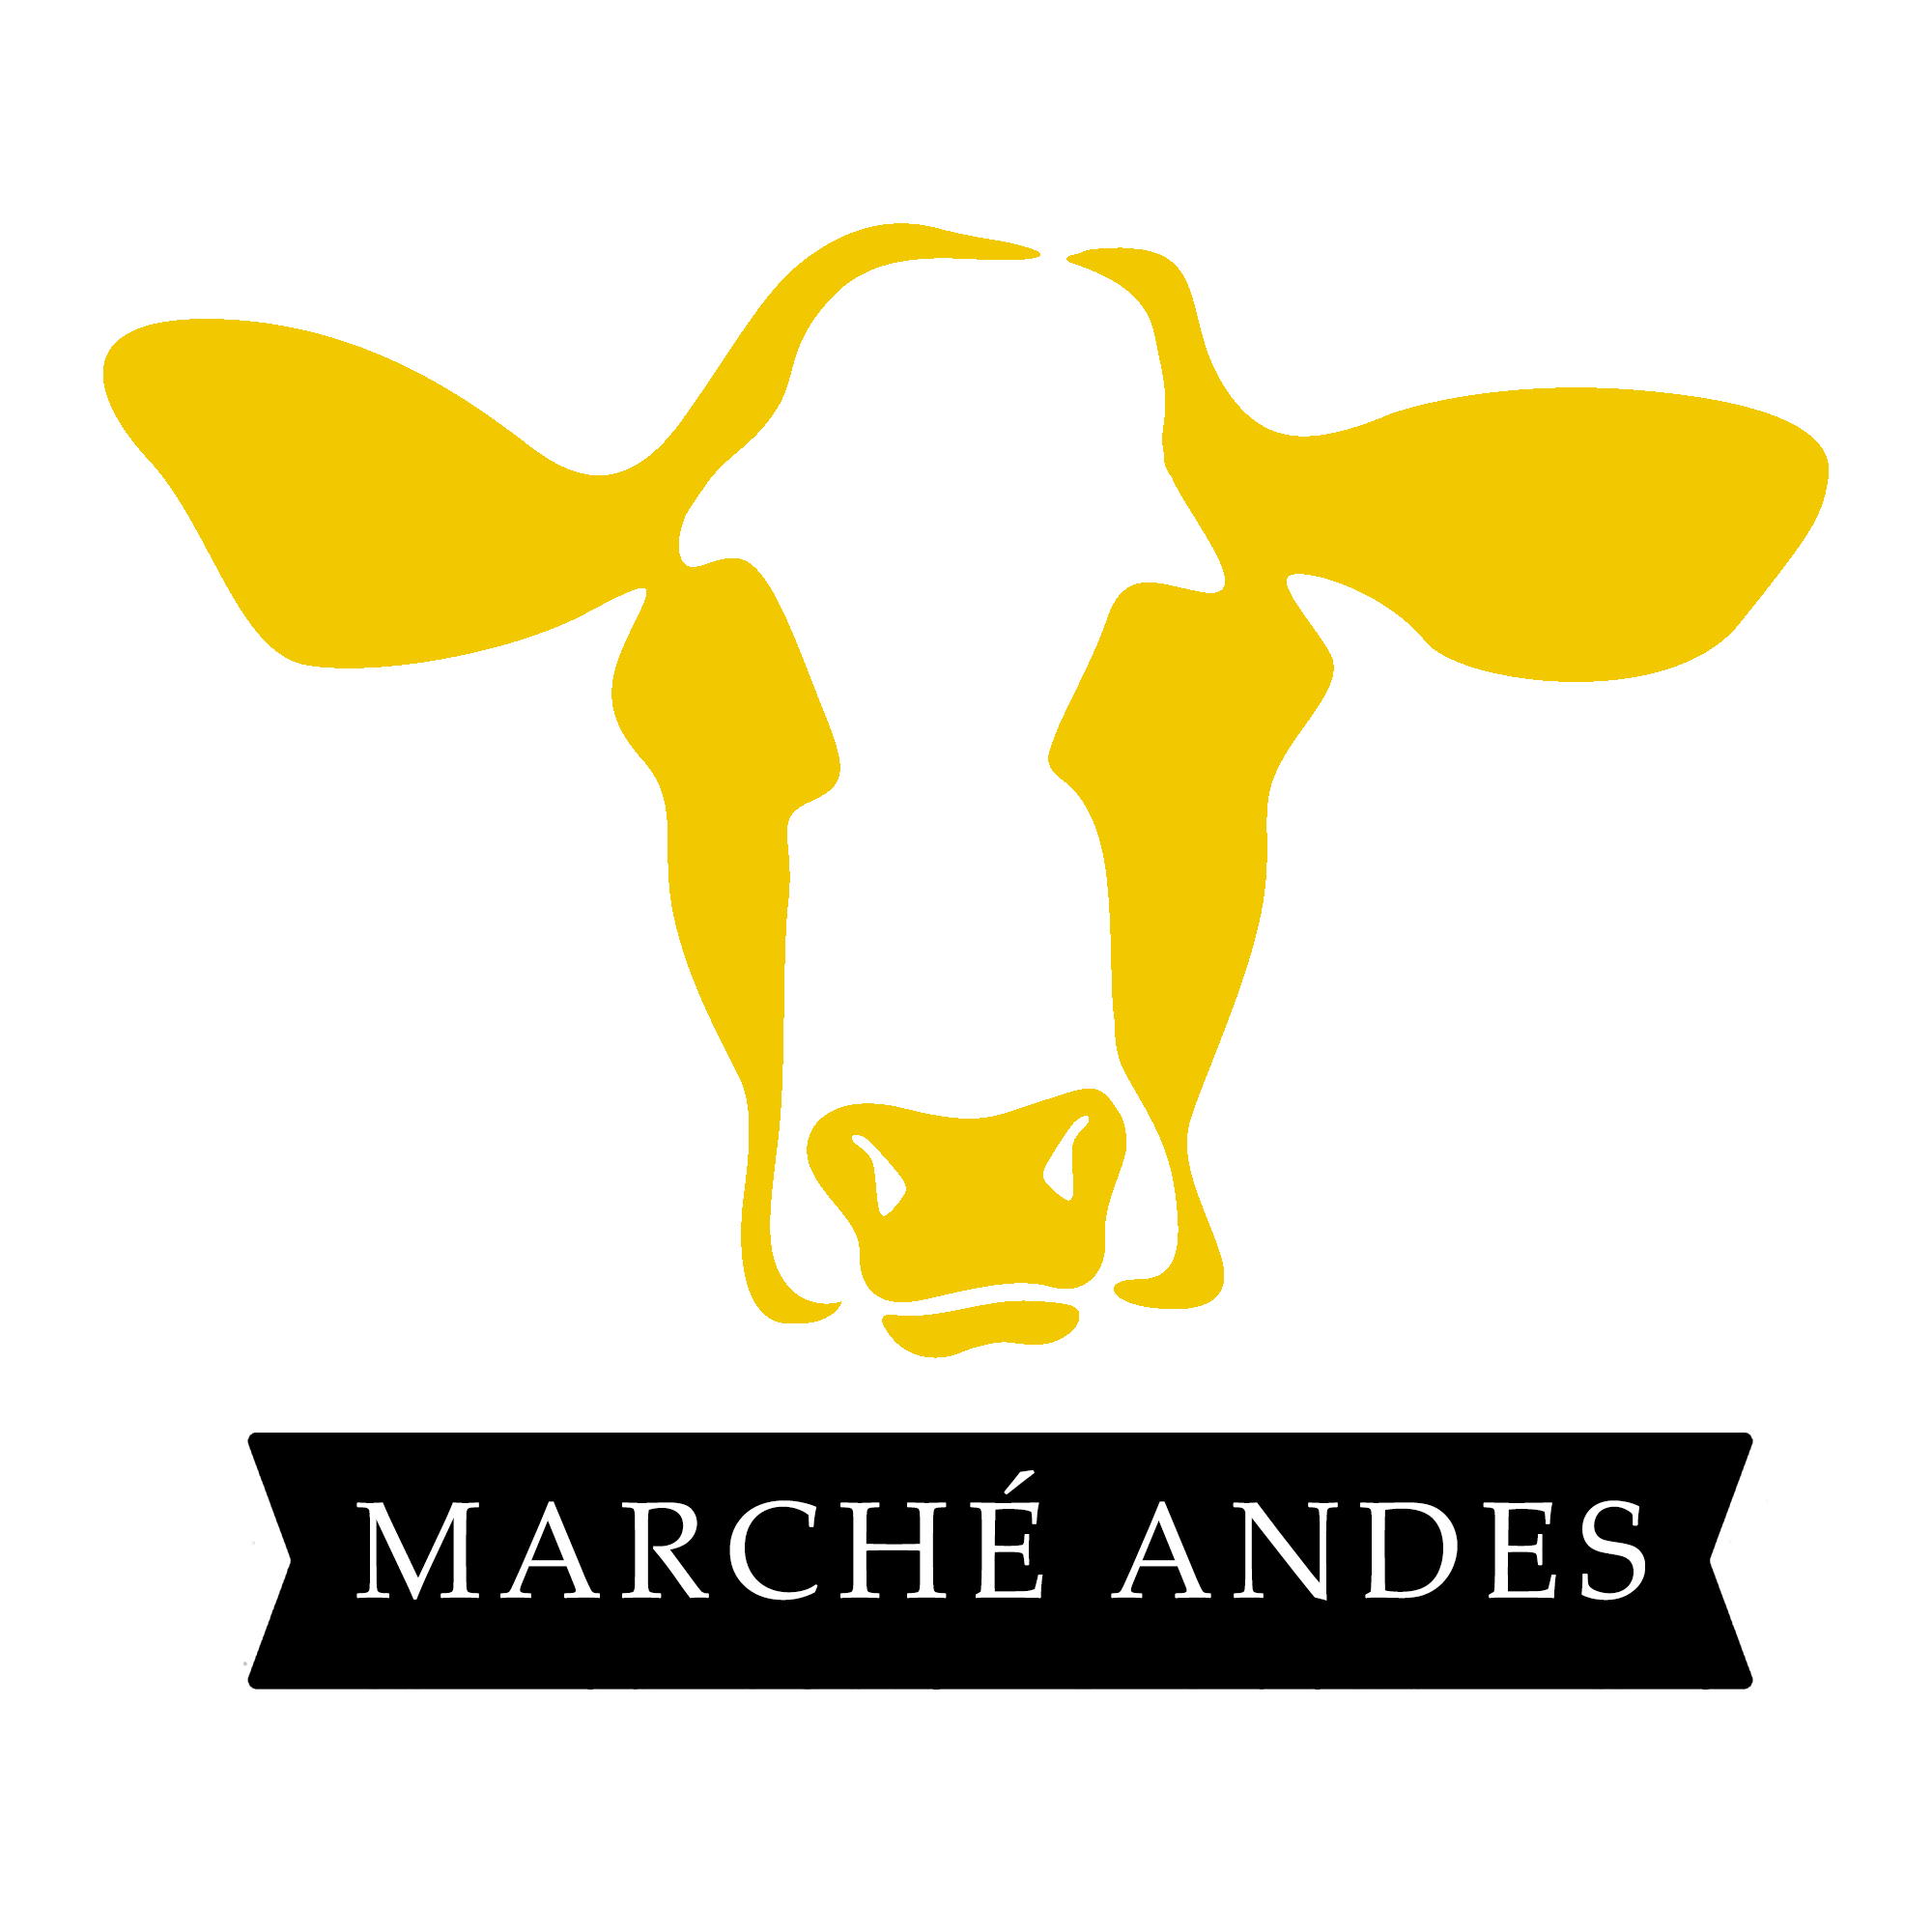 Butchery Marche Andes